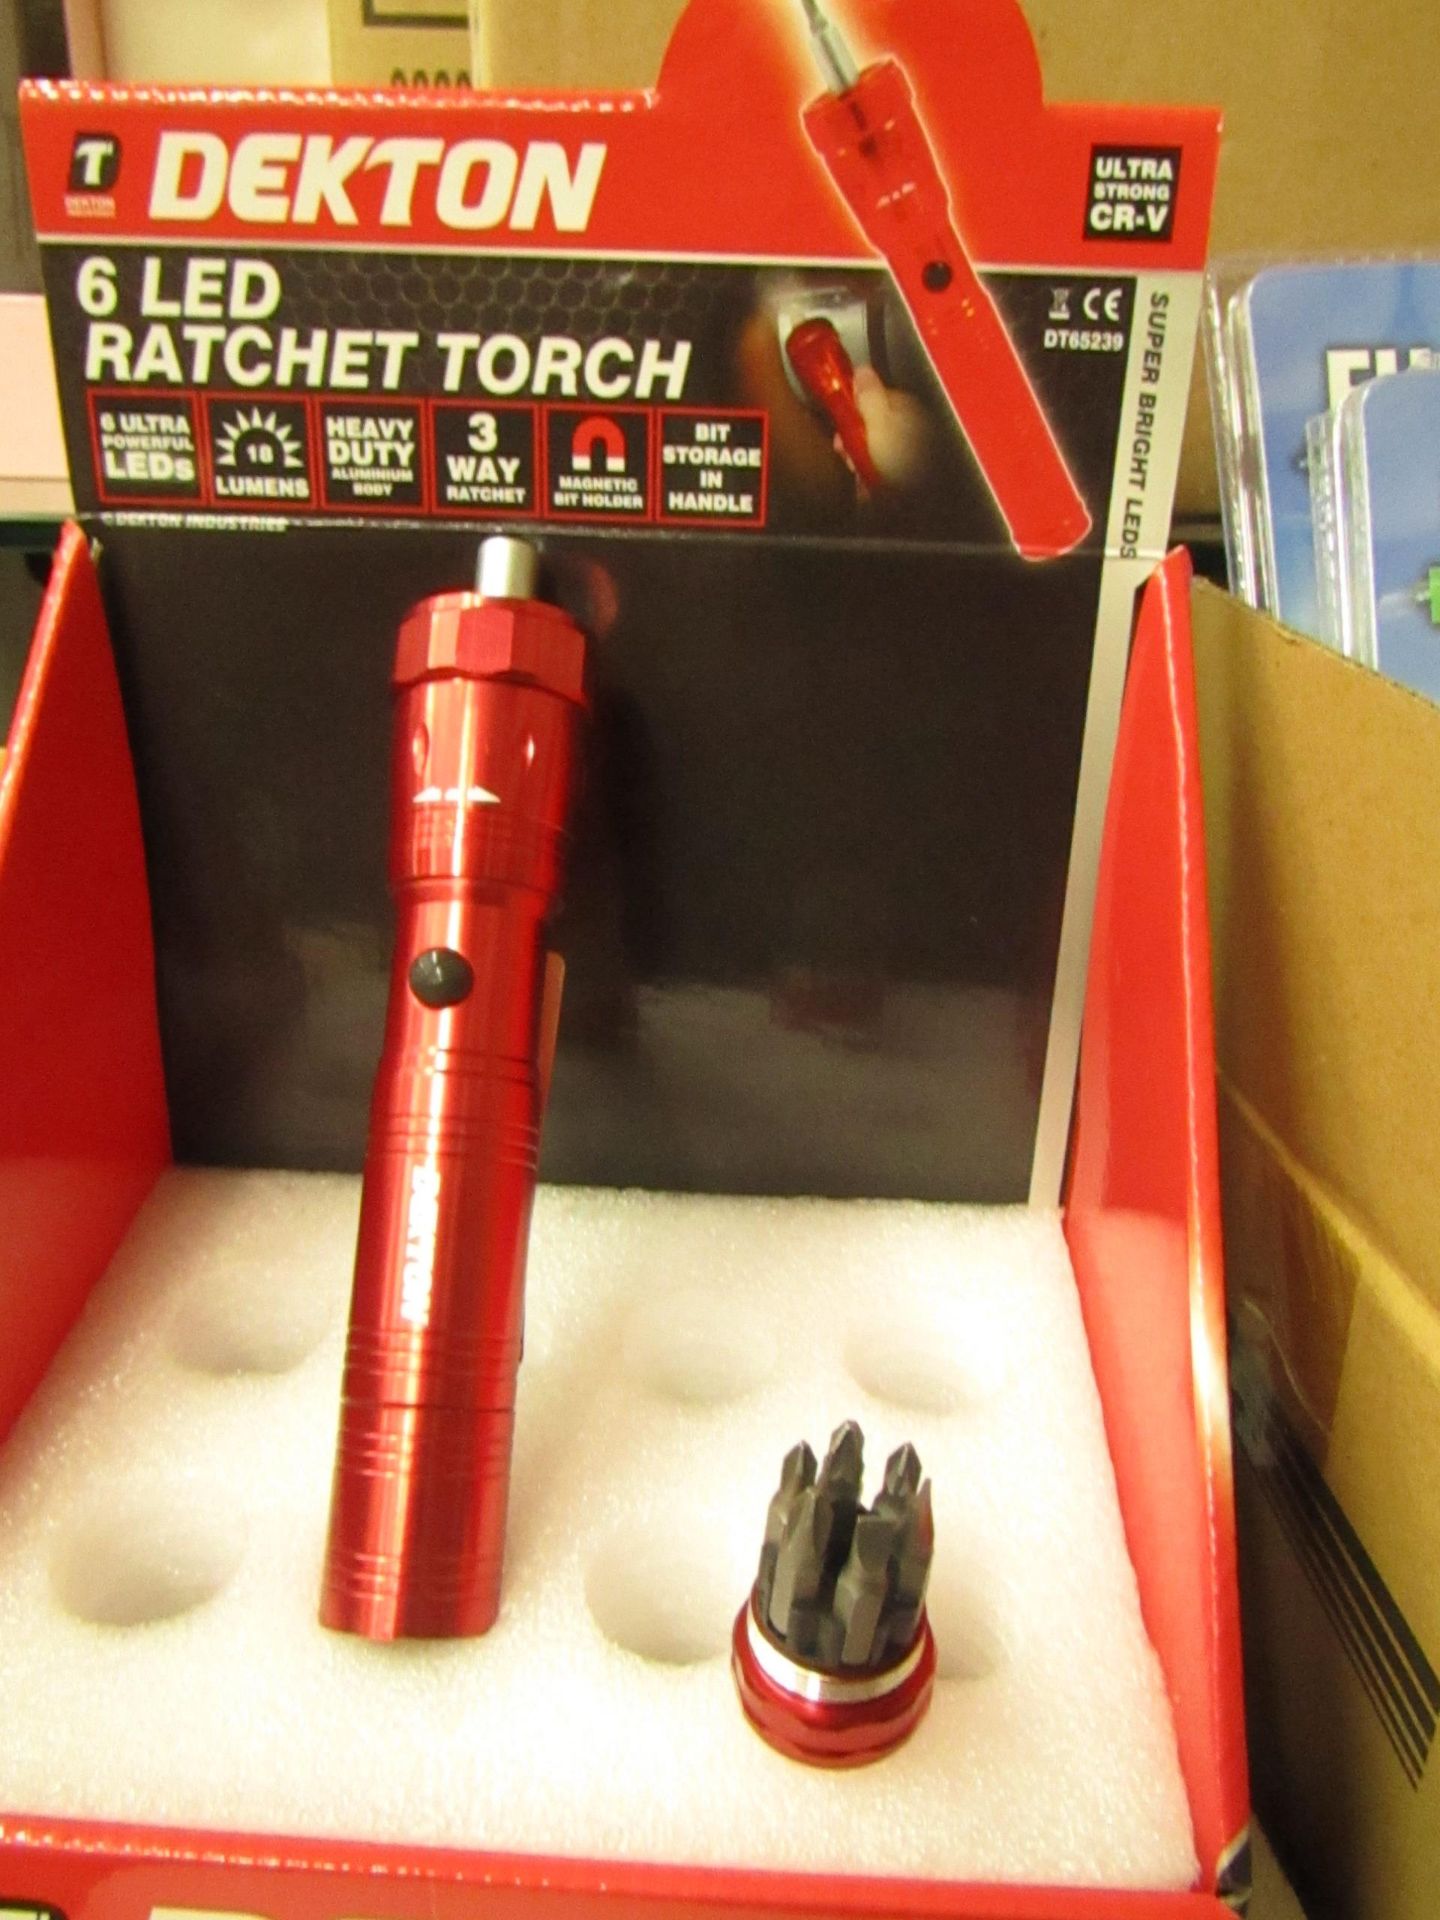 Dekton 6LED Ratchet Torch with bits. New. Ideal Stocking Filler!